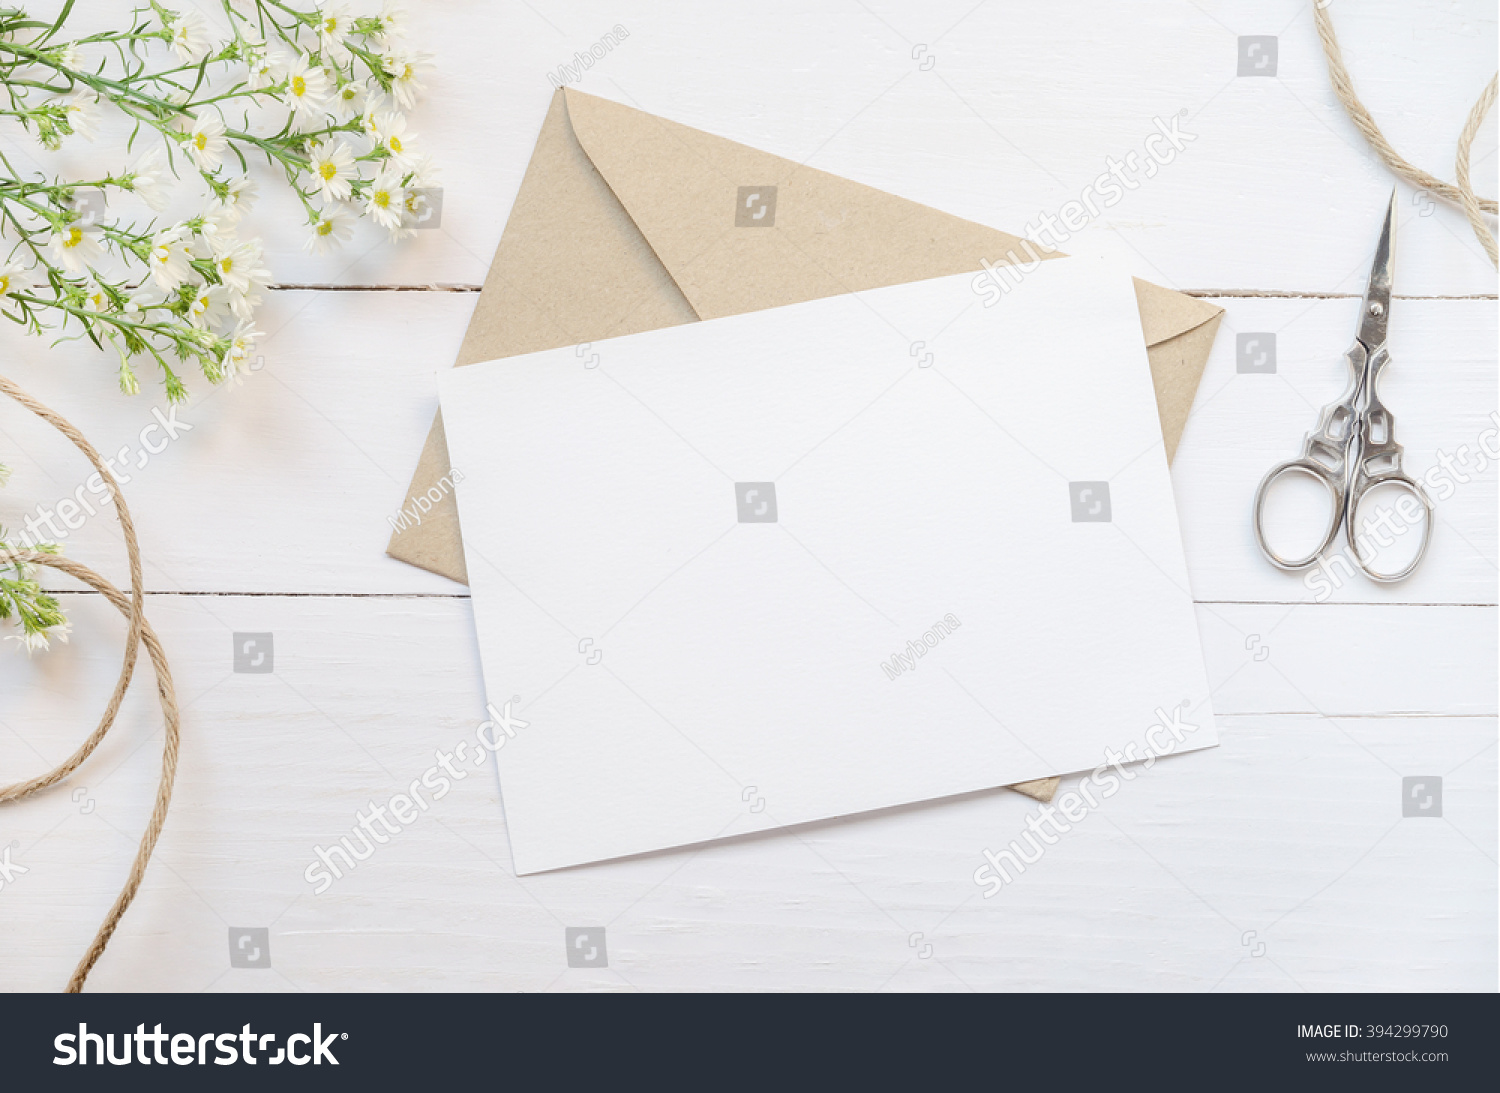 Blank white greeting card with brown envelop and daisy flowers on wooden table with vintage tone #394299790